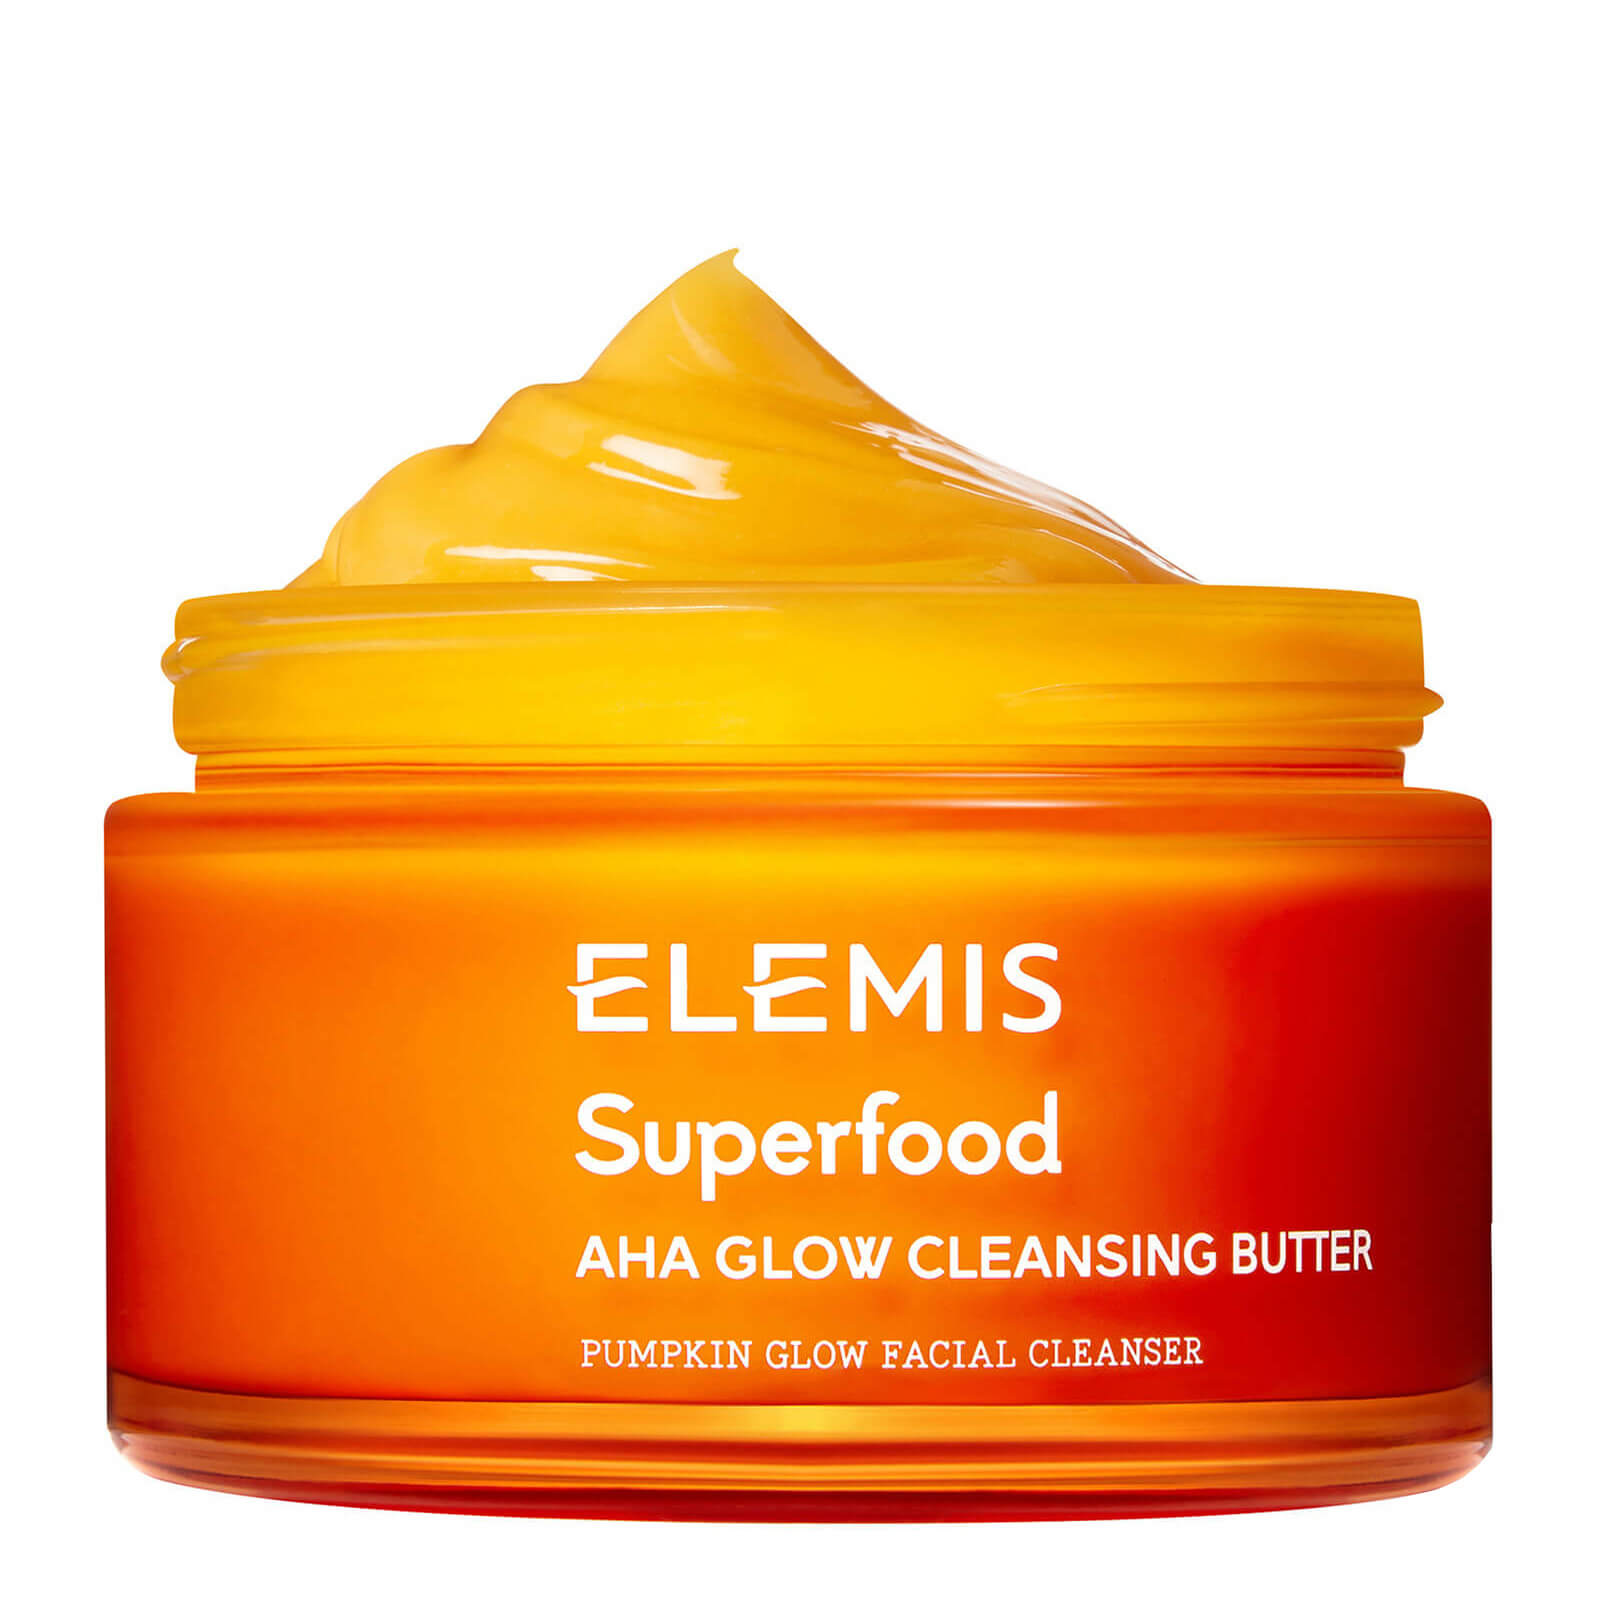 ELEMIS | Superfood AHA Glow Cleansing Butter